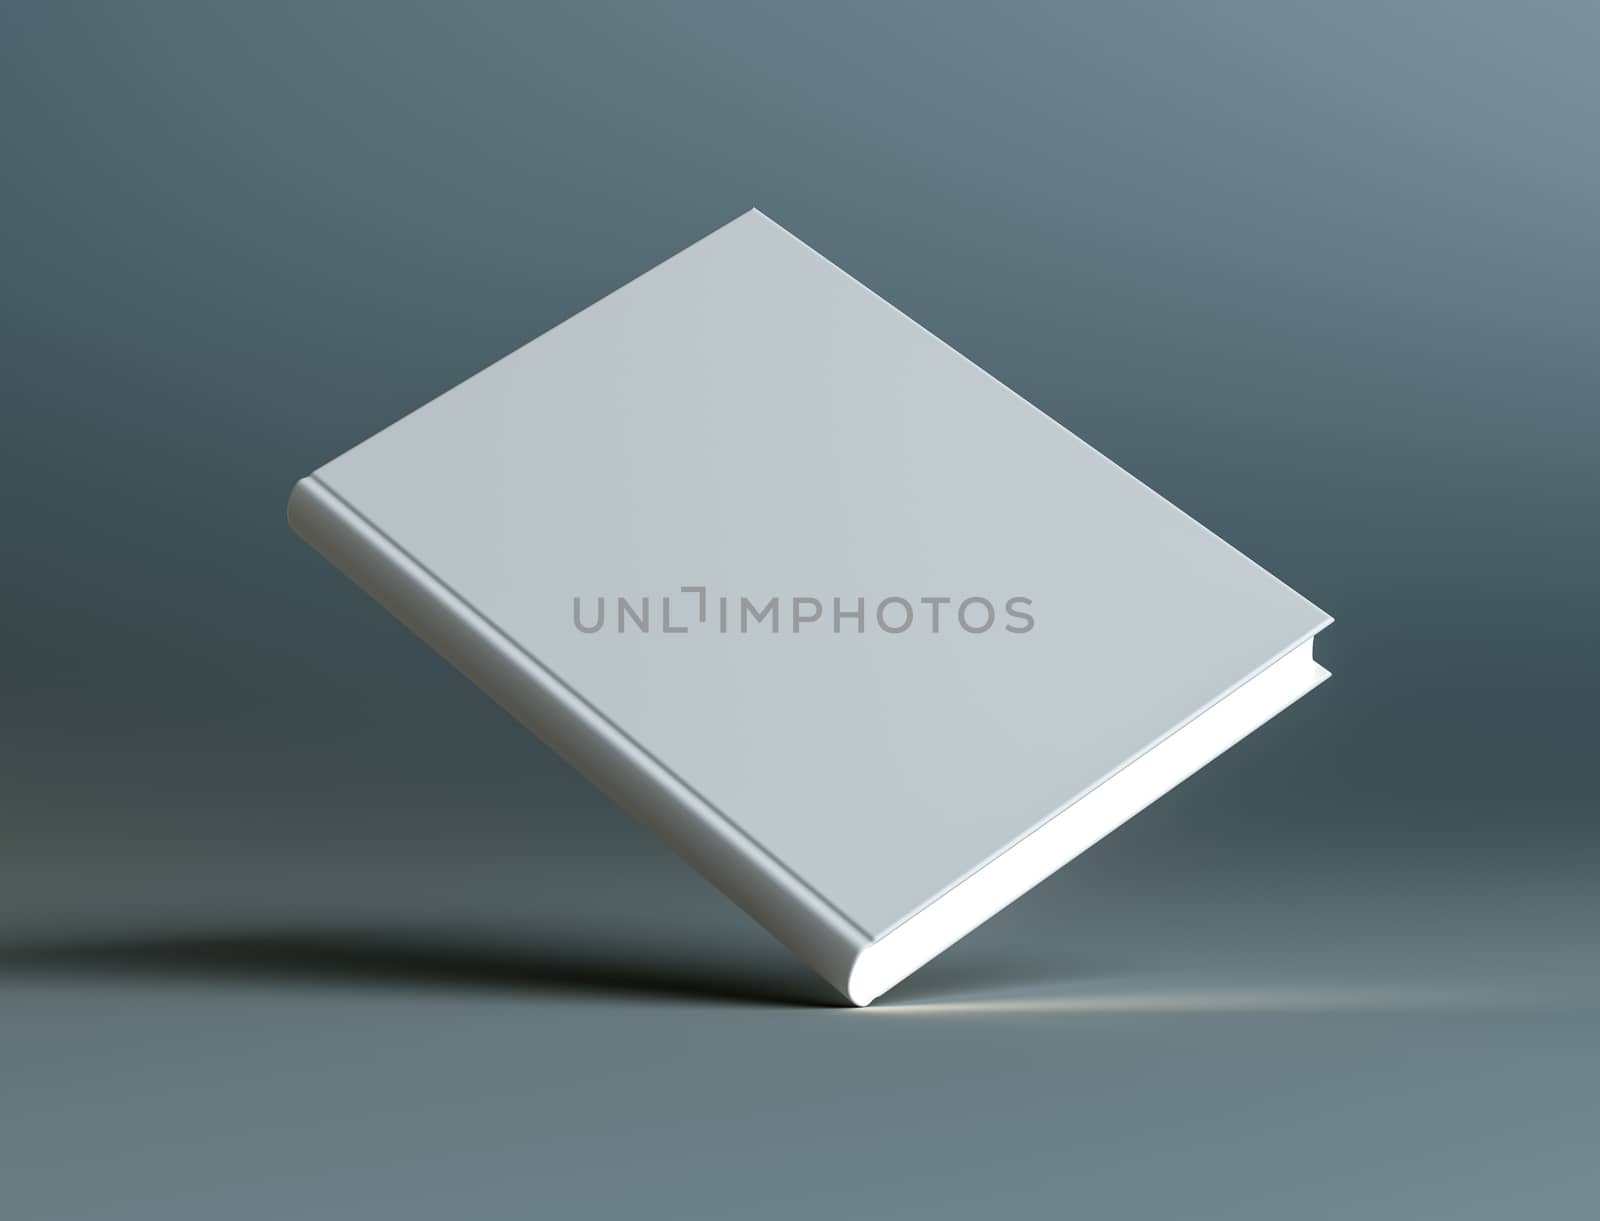 A closed white empty book stands on the corner. The pages are glowing. The concept of learning or advertising of the publication. Dark background. 3d illustration